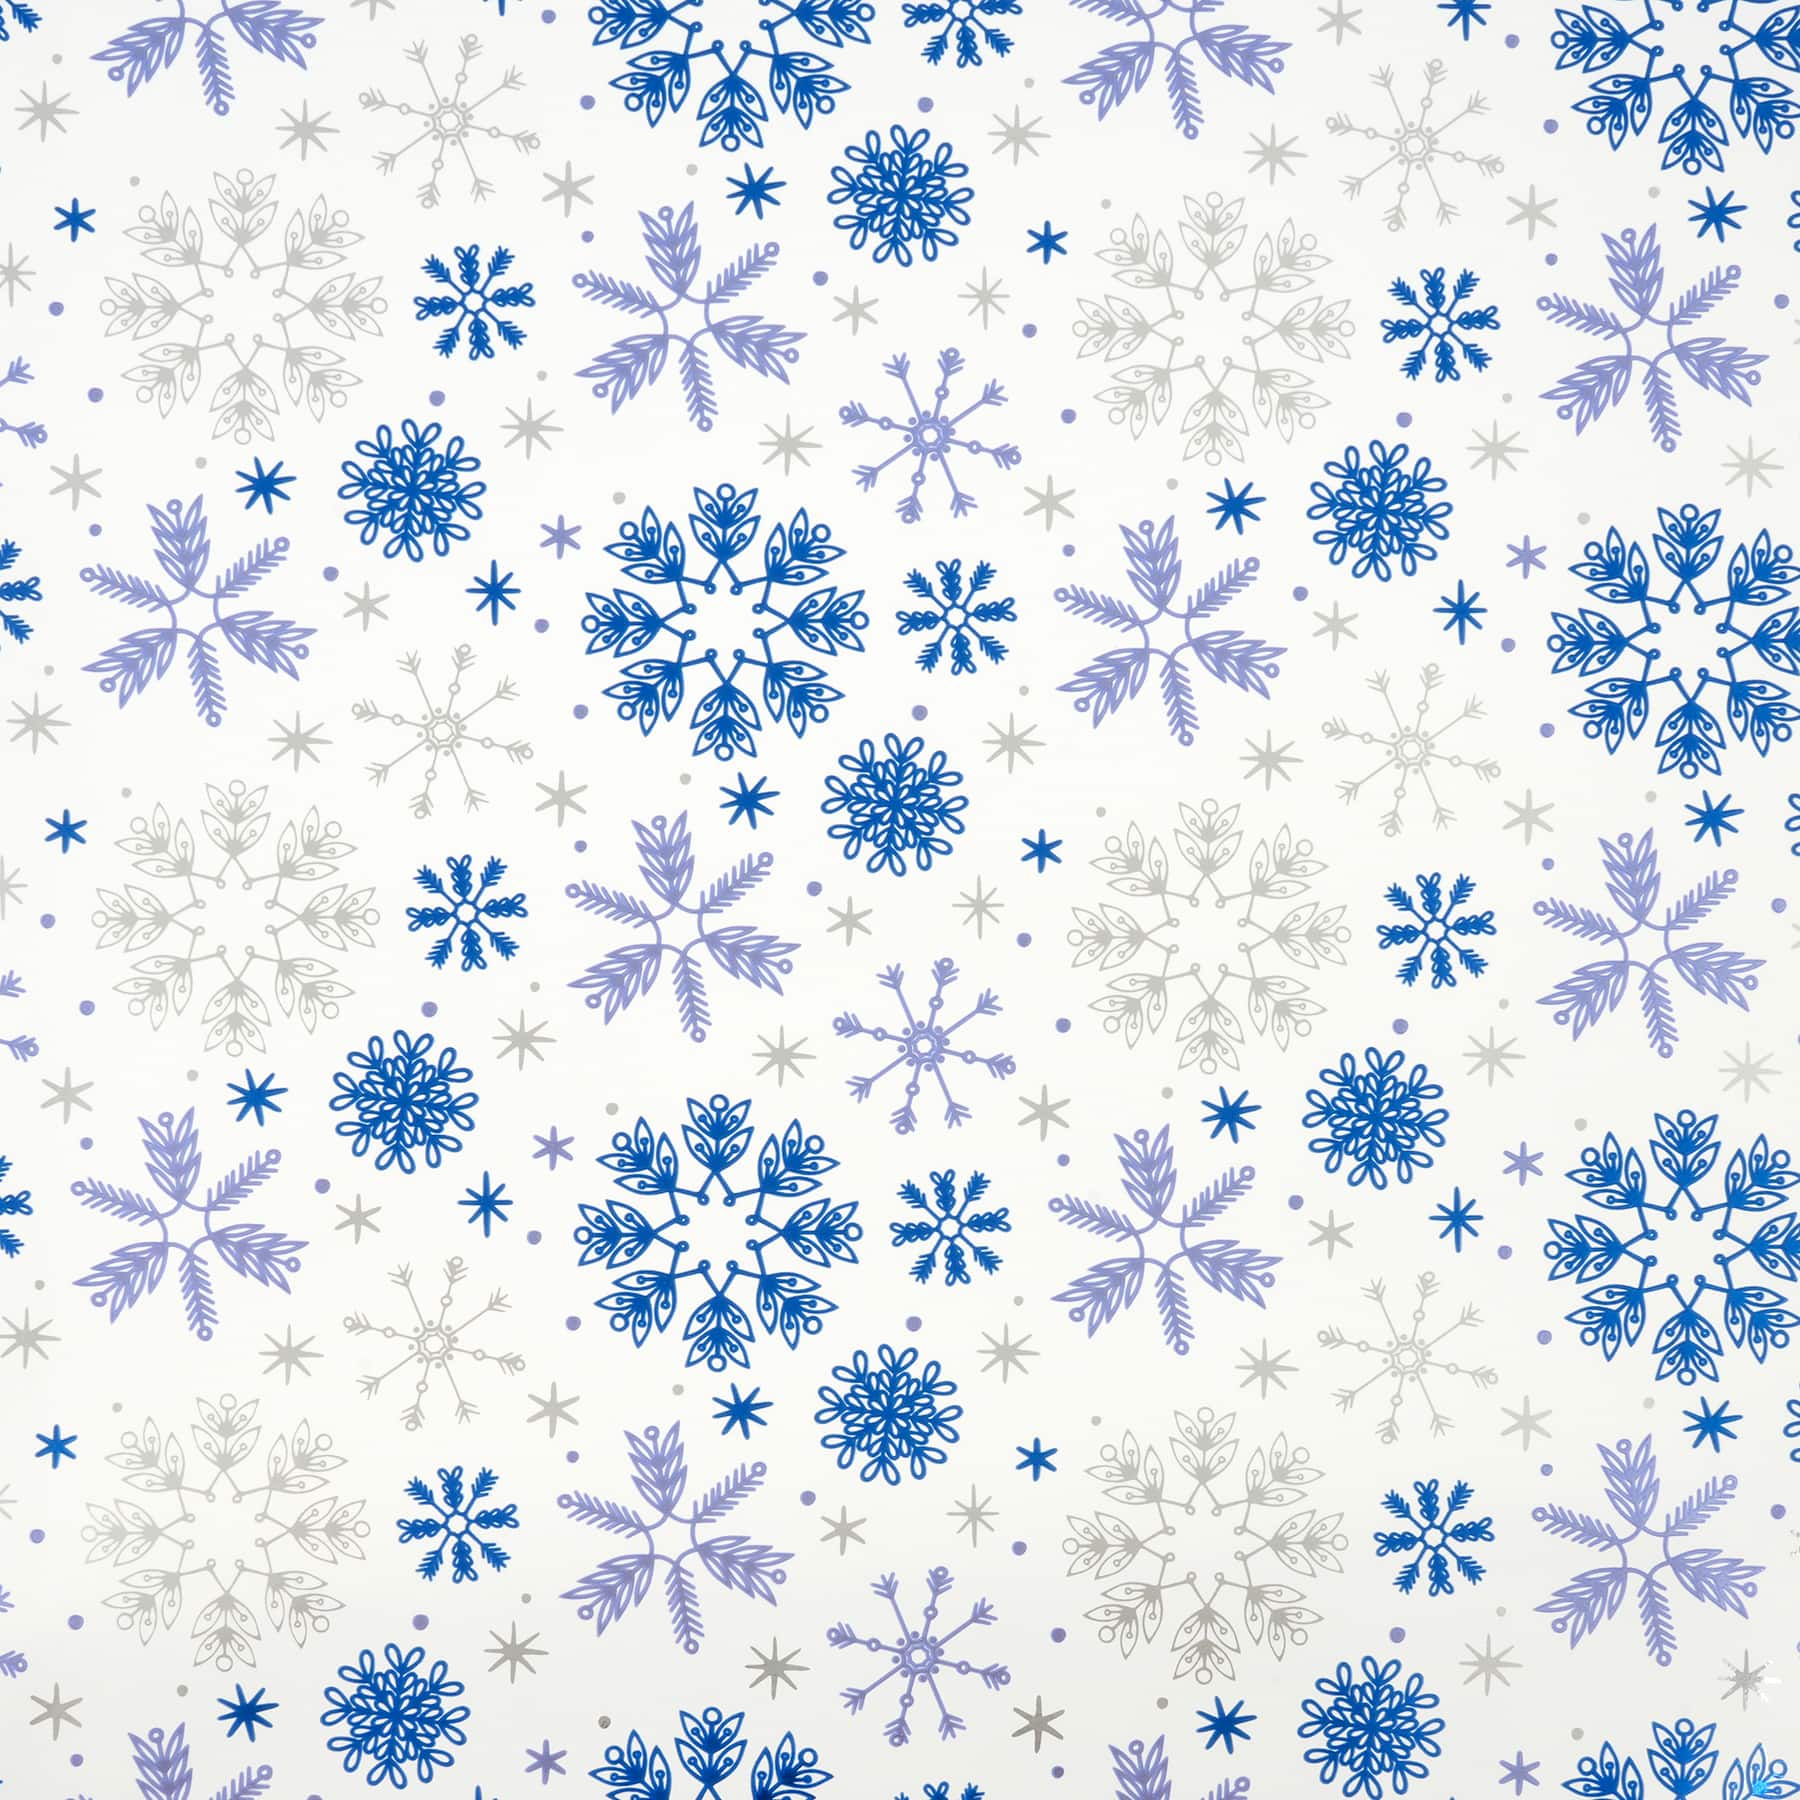 20 sq ft White Snowflakes Silver Gift Wrapping paper